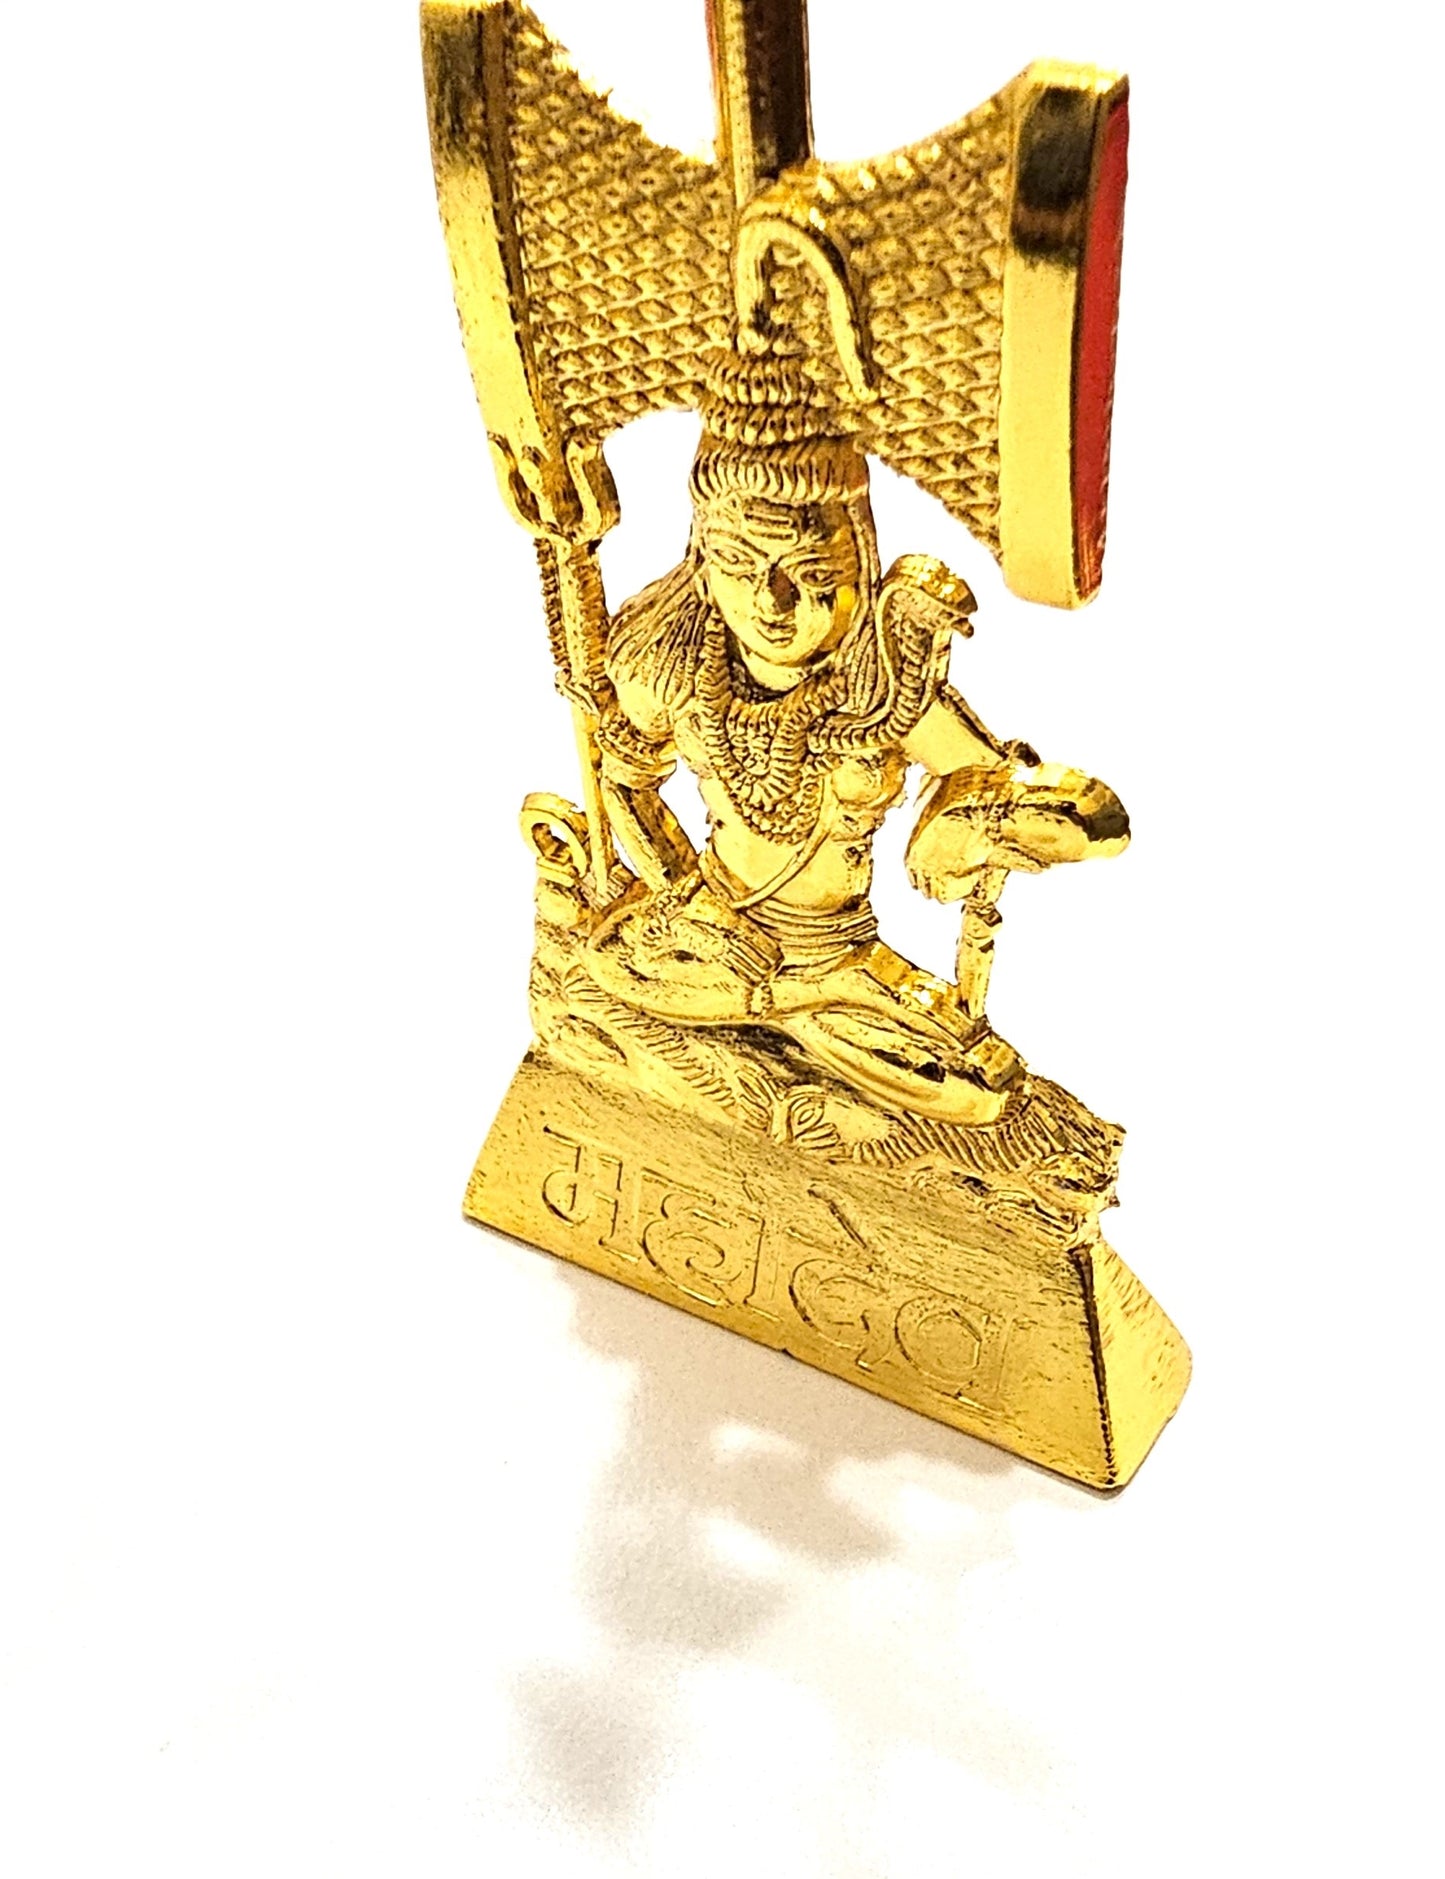 Rare Lord Shiva and Trishul ( Trident ) Gold Plated Statue